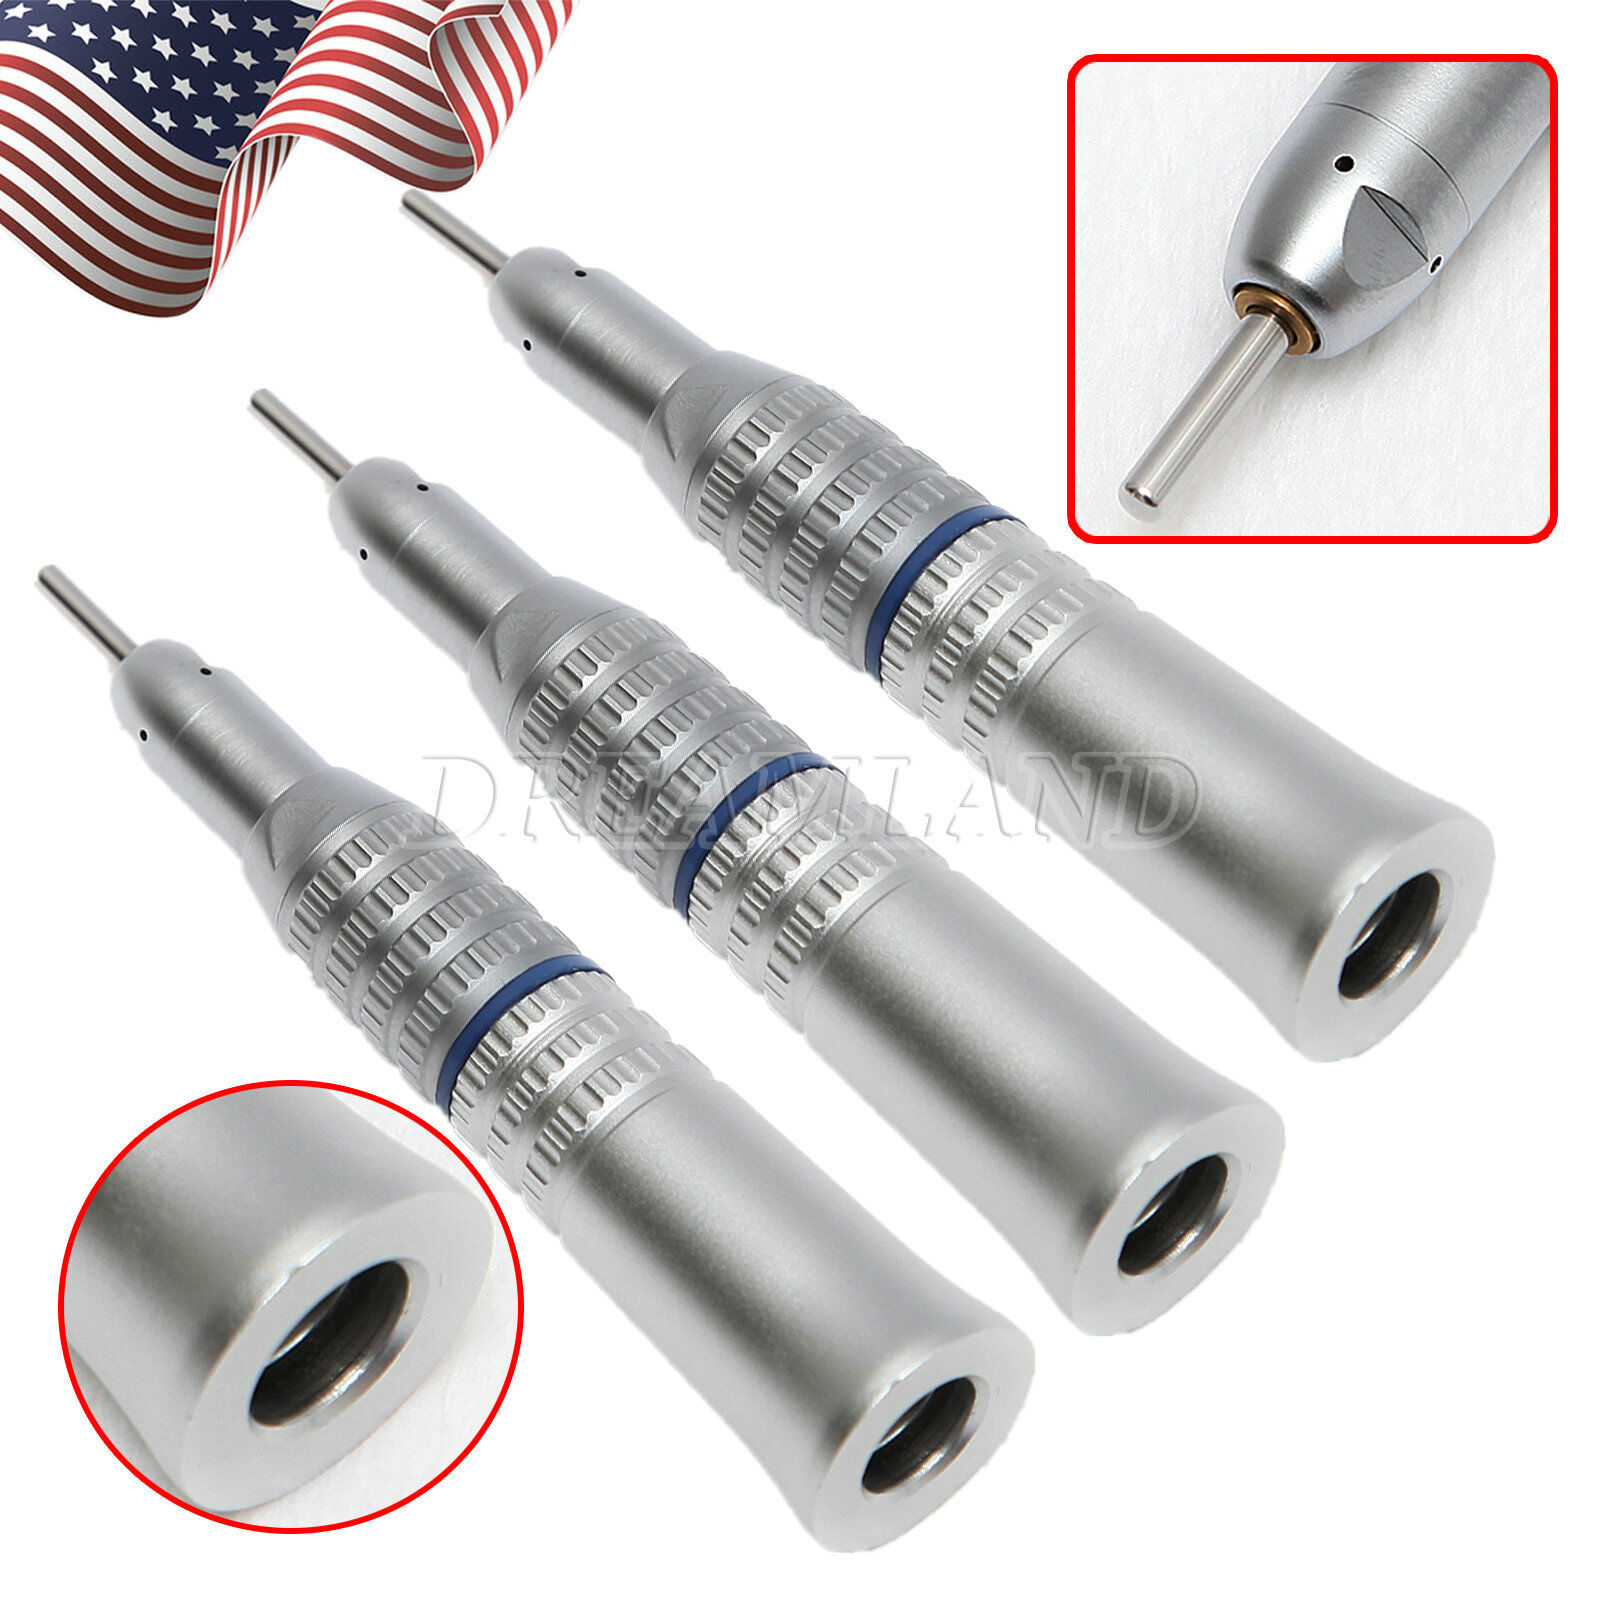 3Pcs Dental Straight Nose Cone E-type Low Speed 1:1 Handpiece Fit NSK HP 2.35mm